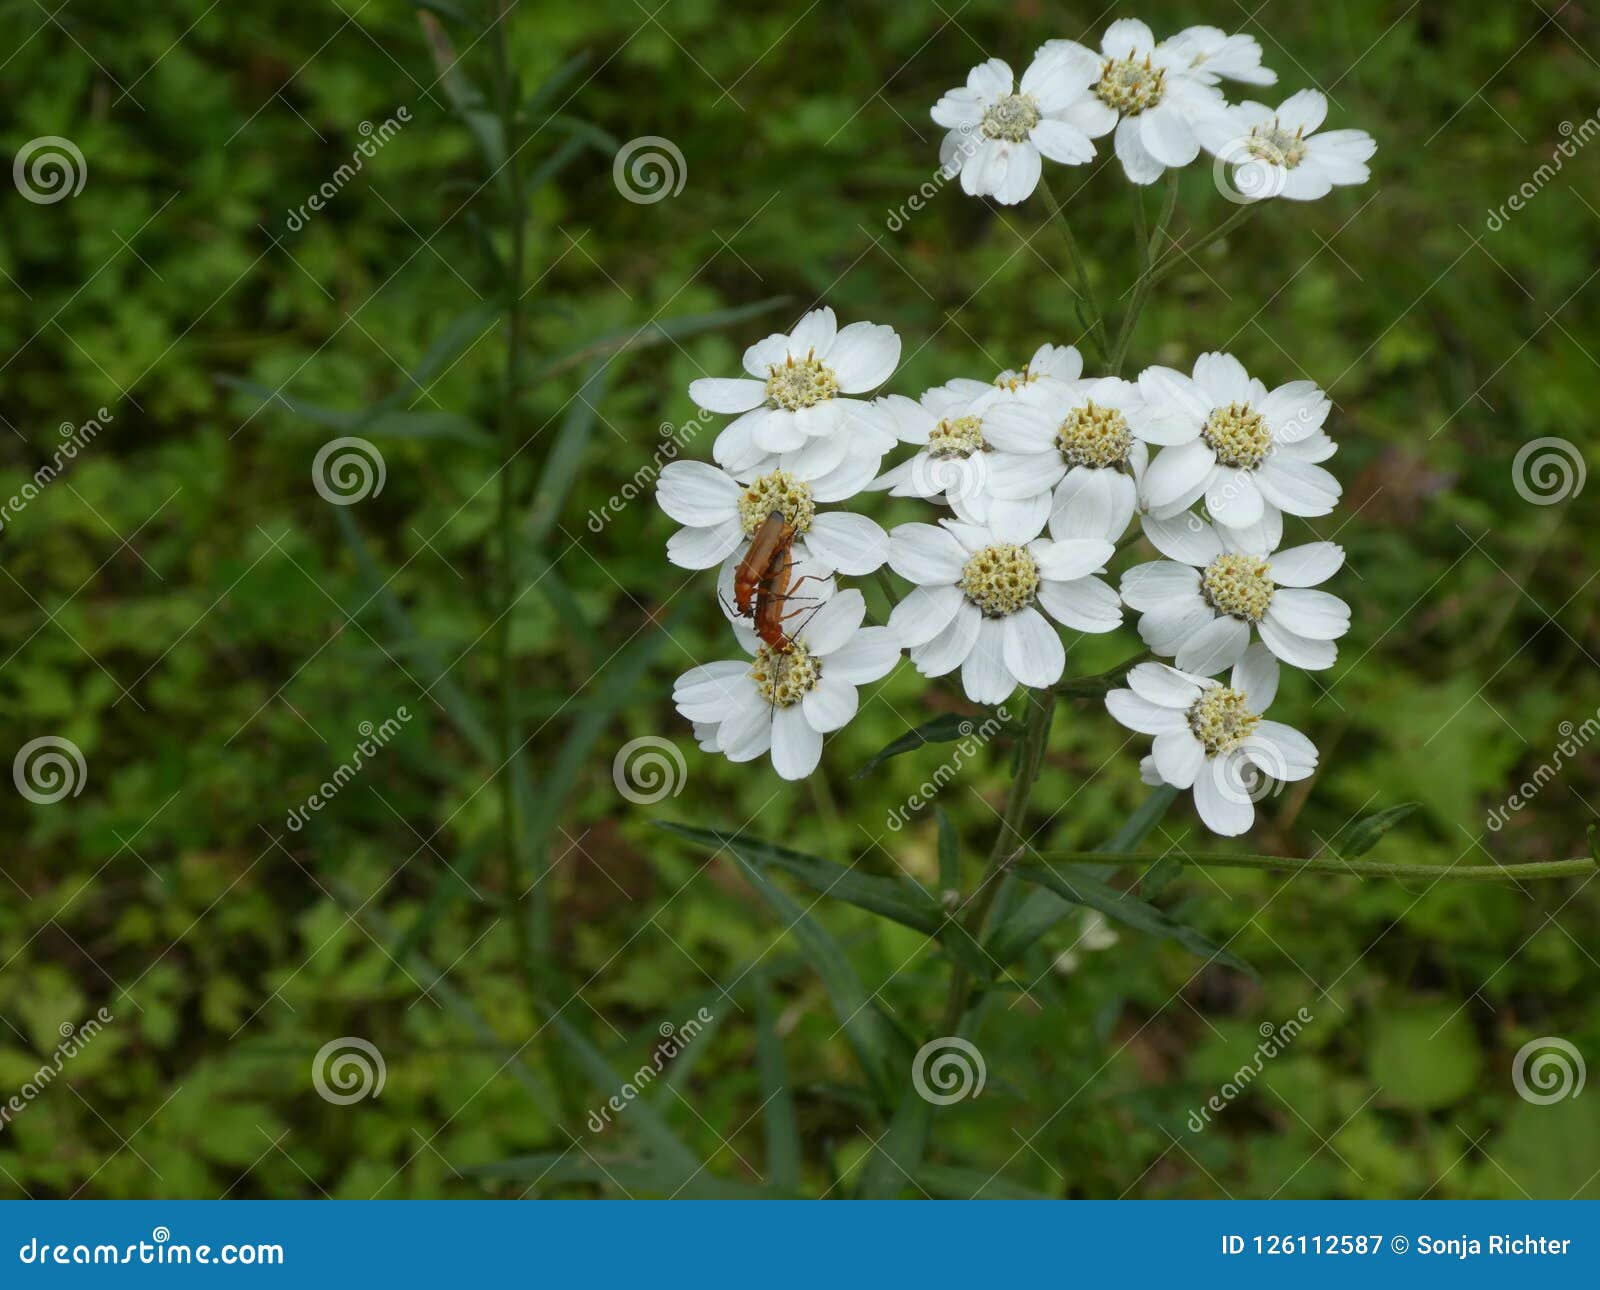 Yarrow Flower with White Blossom in the Forest Stock Image - Image of ...